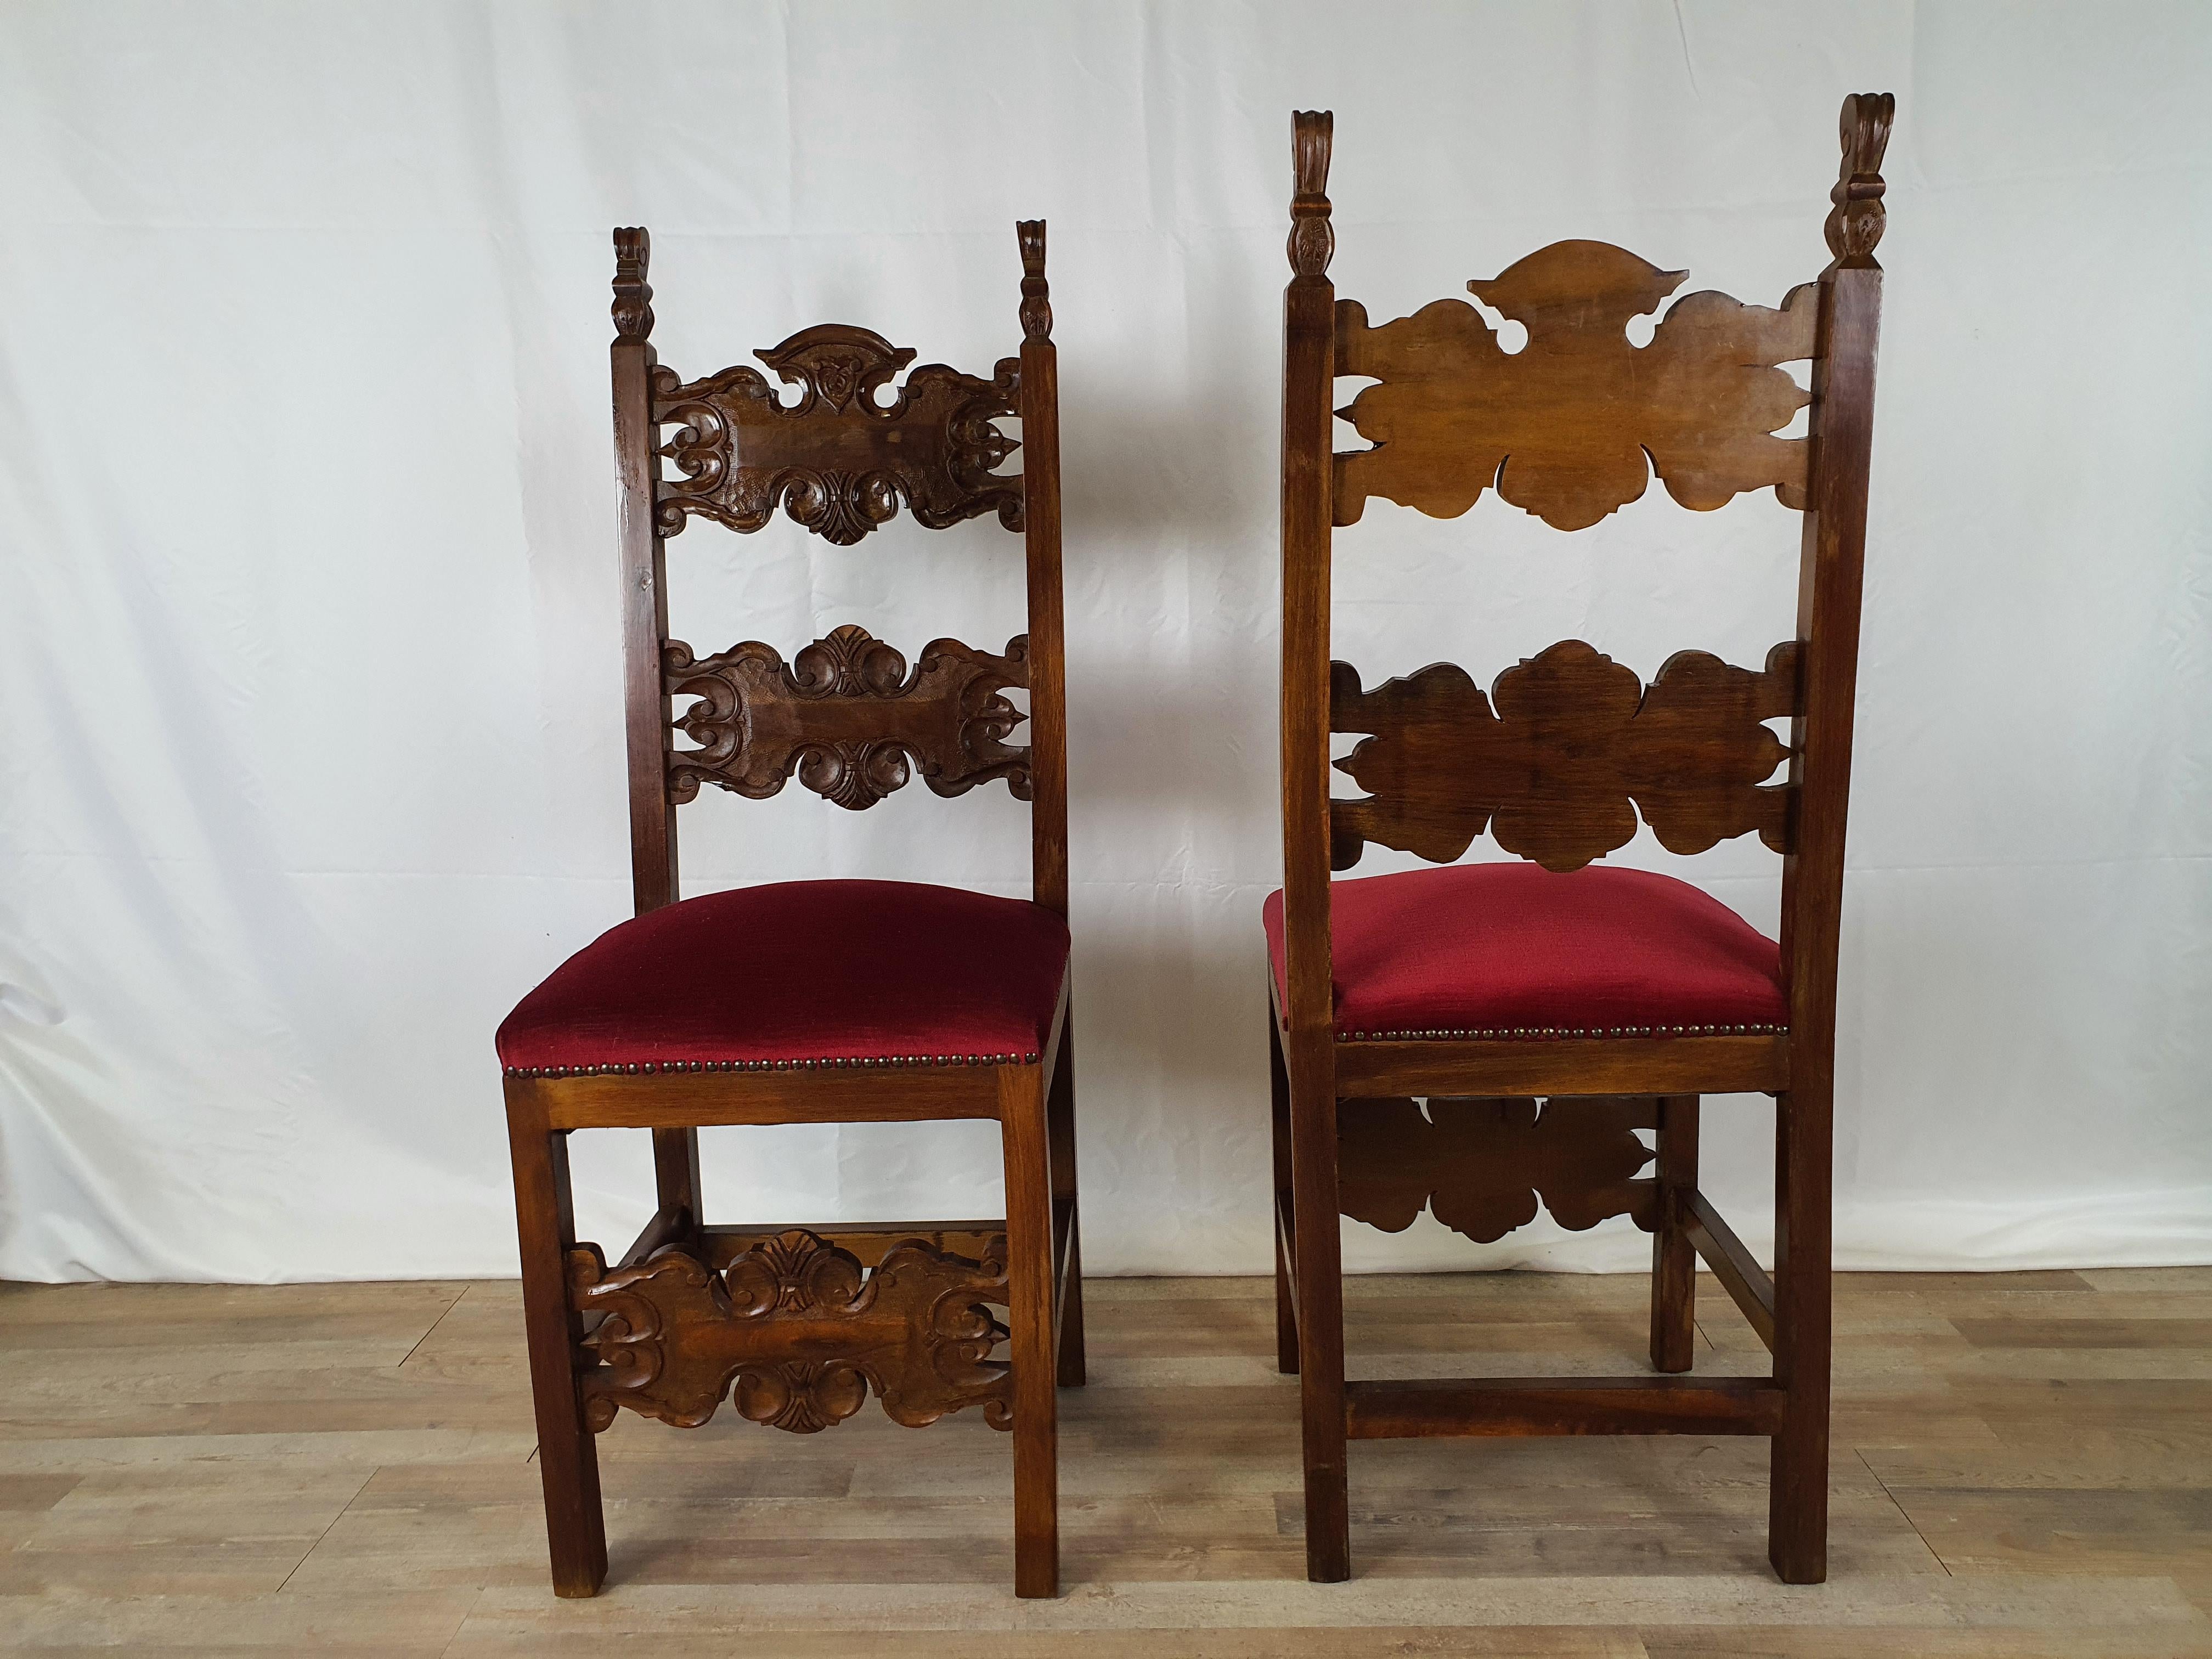 Italian Pair of Renaissance Chairs from the Early 1900s